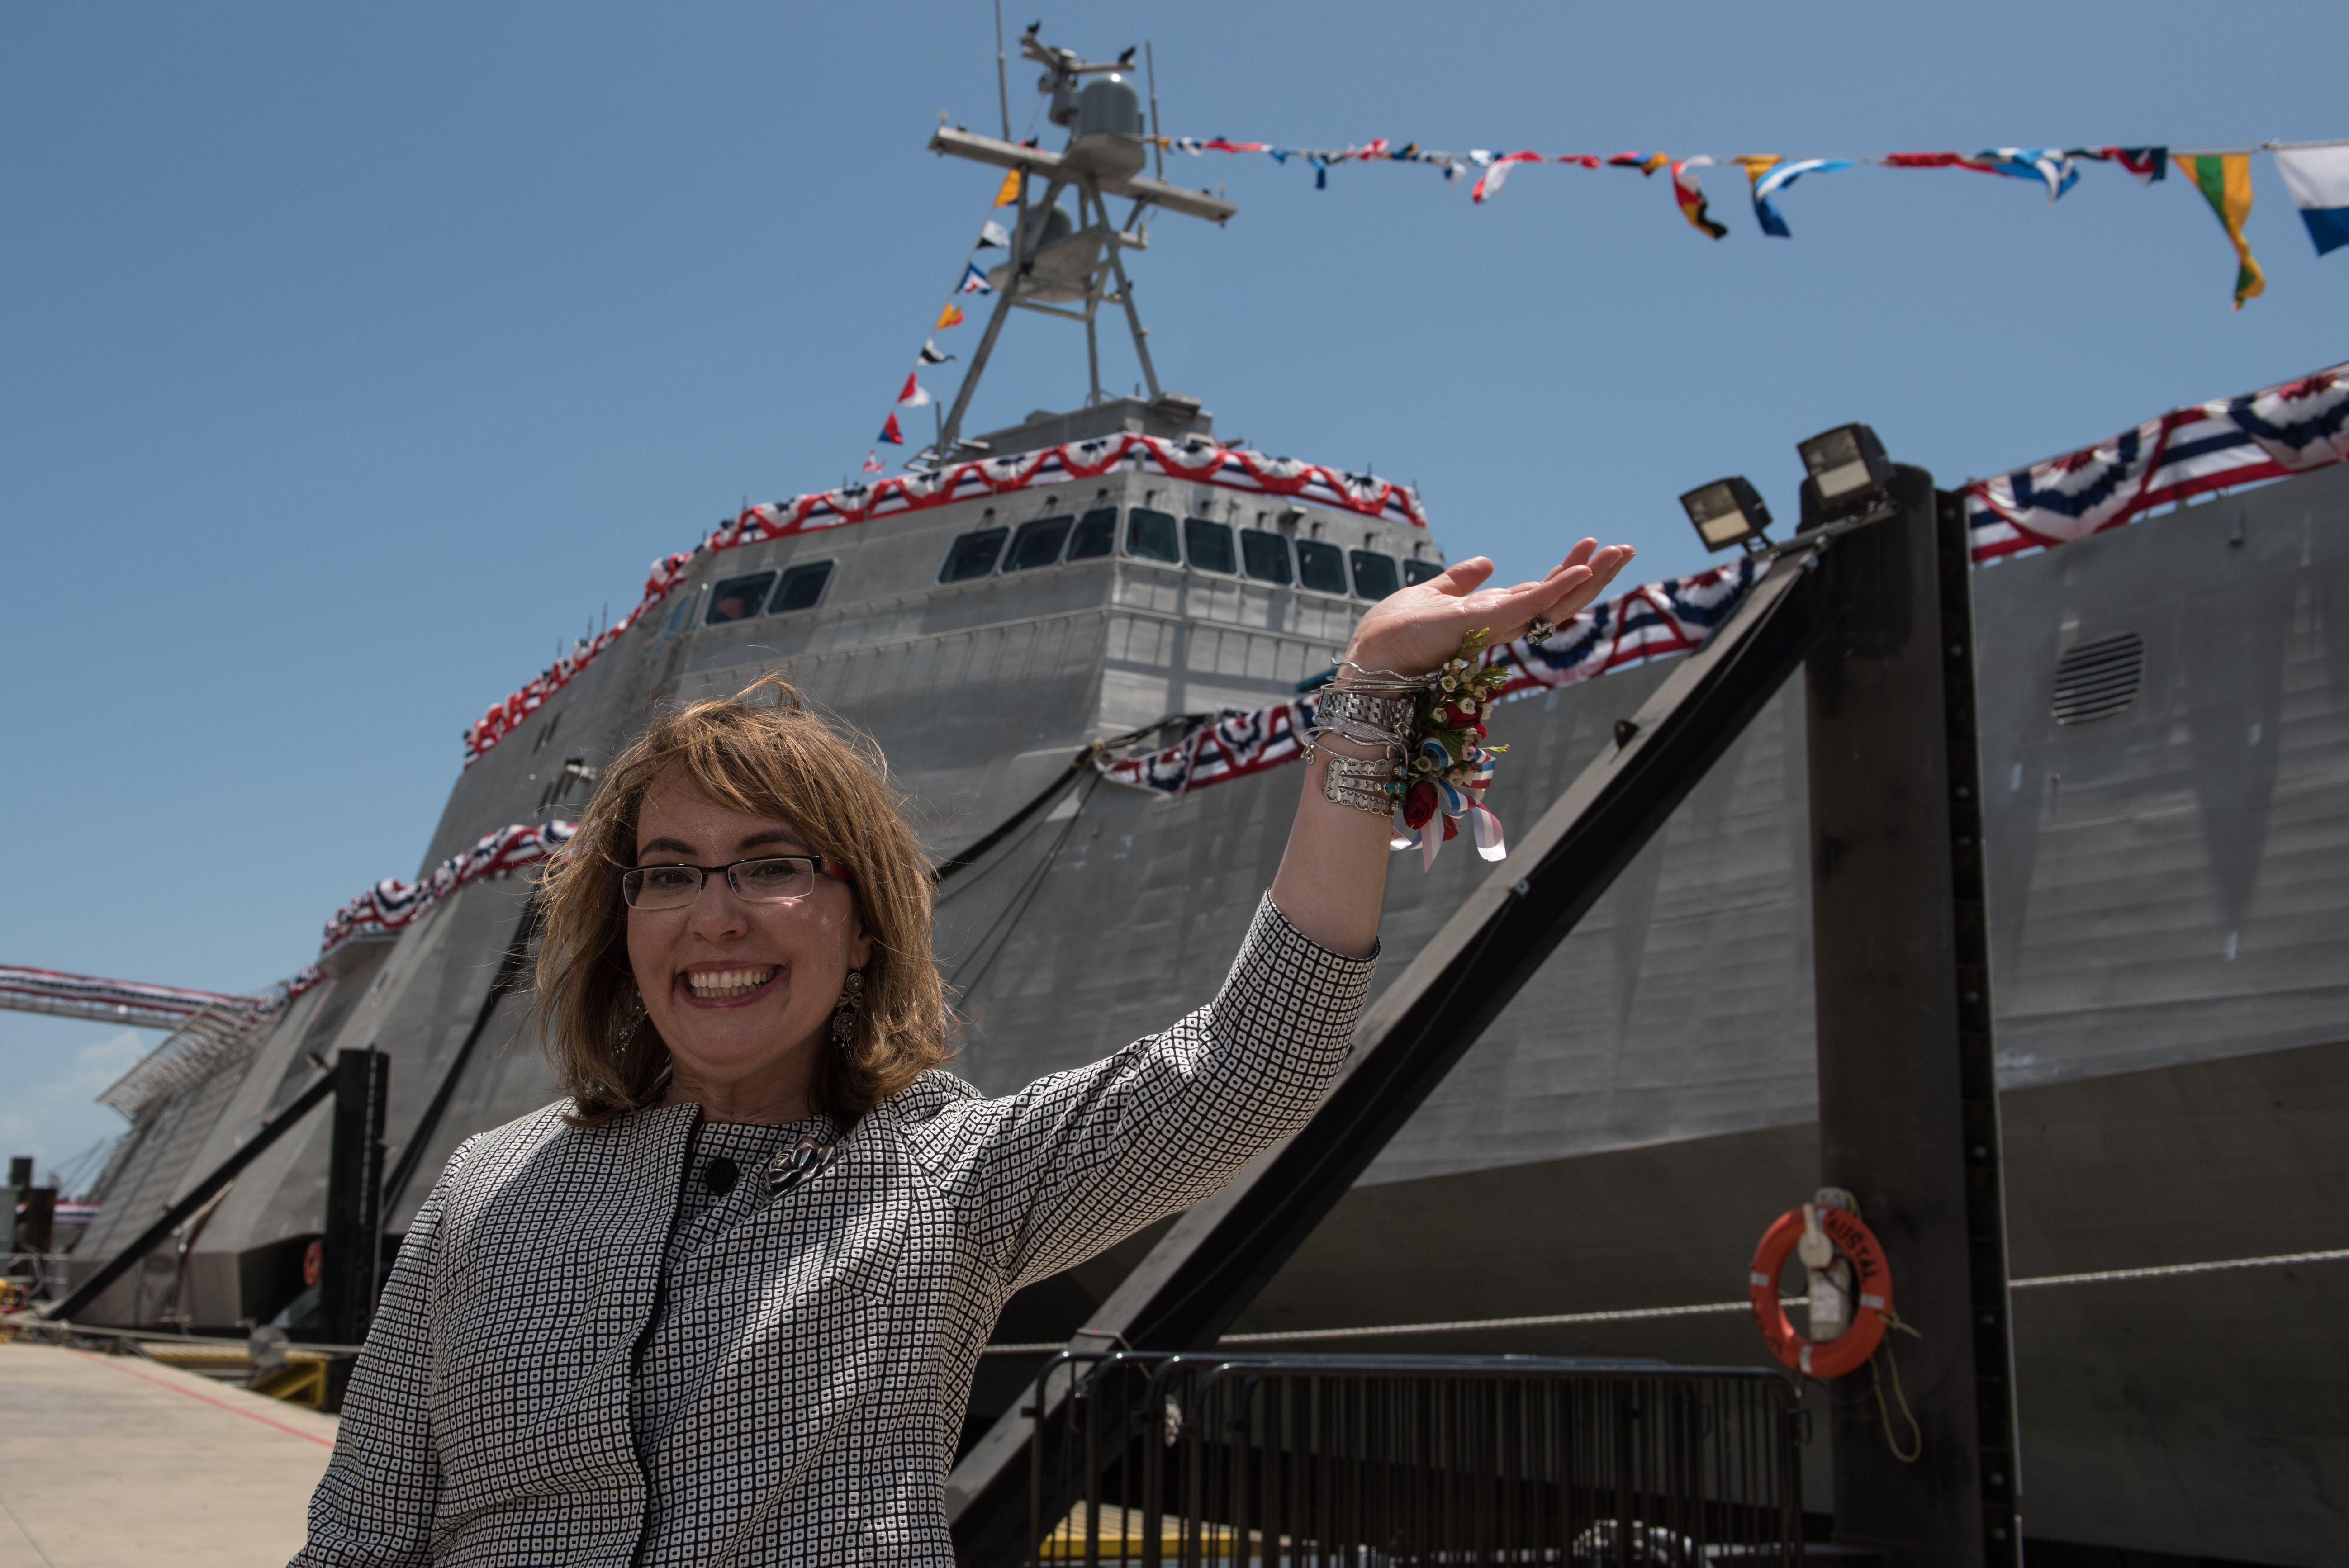 Former U.S. Rep. Gabrielle Giffords waves to a crowd in front of the littoral combat ship, USS Gabrielle Giffords (LCS 10), during the ship's christening ceremony on June 13, 2015. US Navy photo.